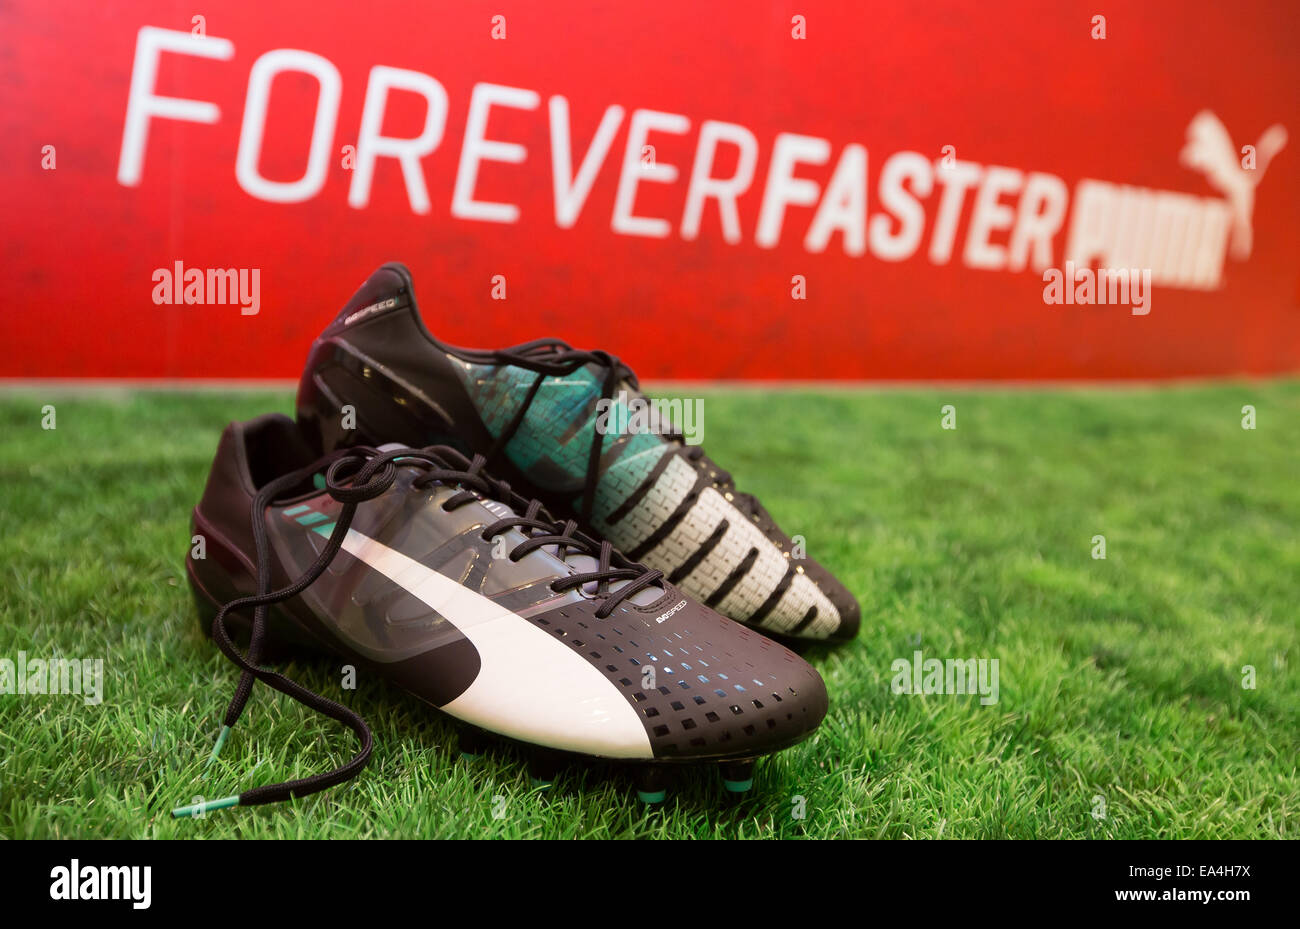 PUMA football boot evoSPEED lying on the grass with Forever Faster slogan and PUMA logo in the background.     COMMERCIAL HANDOUT/EDITORIAL USE ONLY/NO SALES. Please quote the source 'photo: PUMA/Ralf Roedel'.     Stock Photo